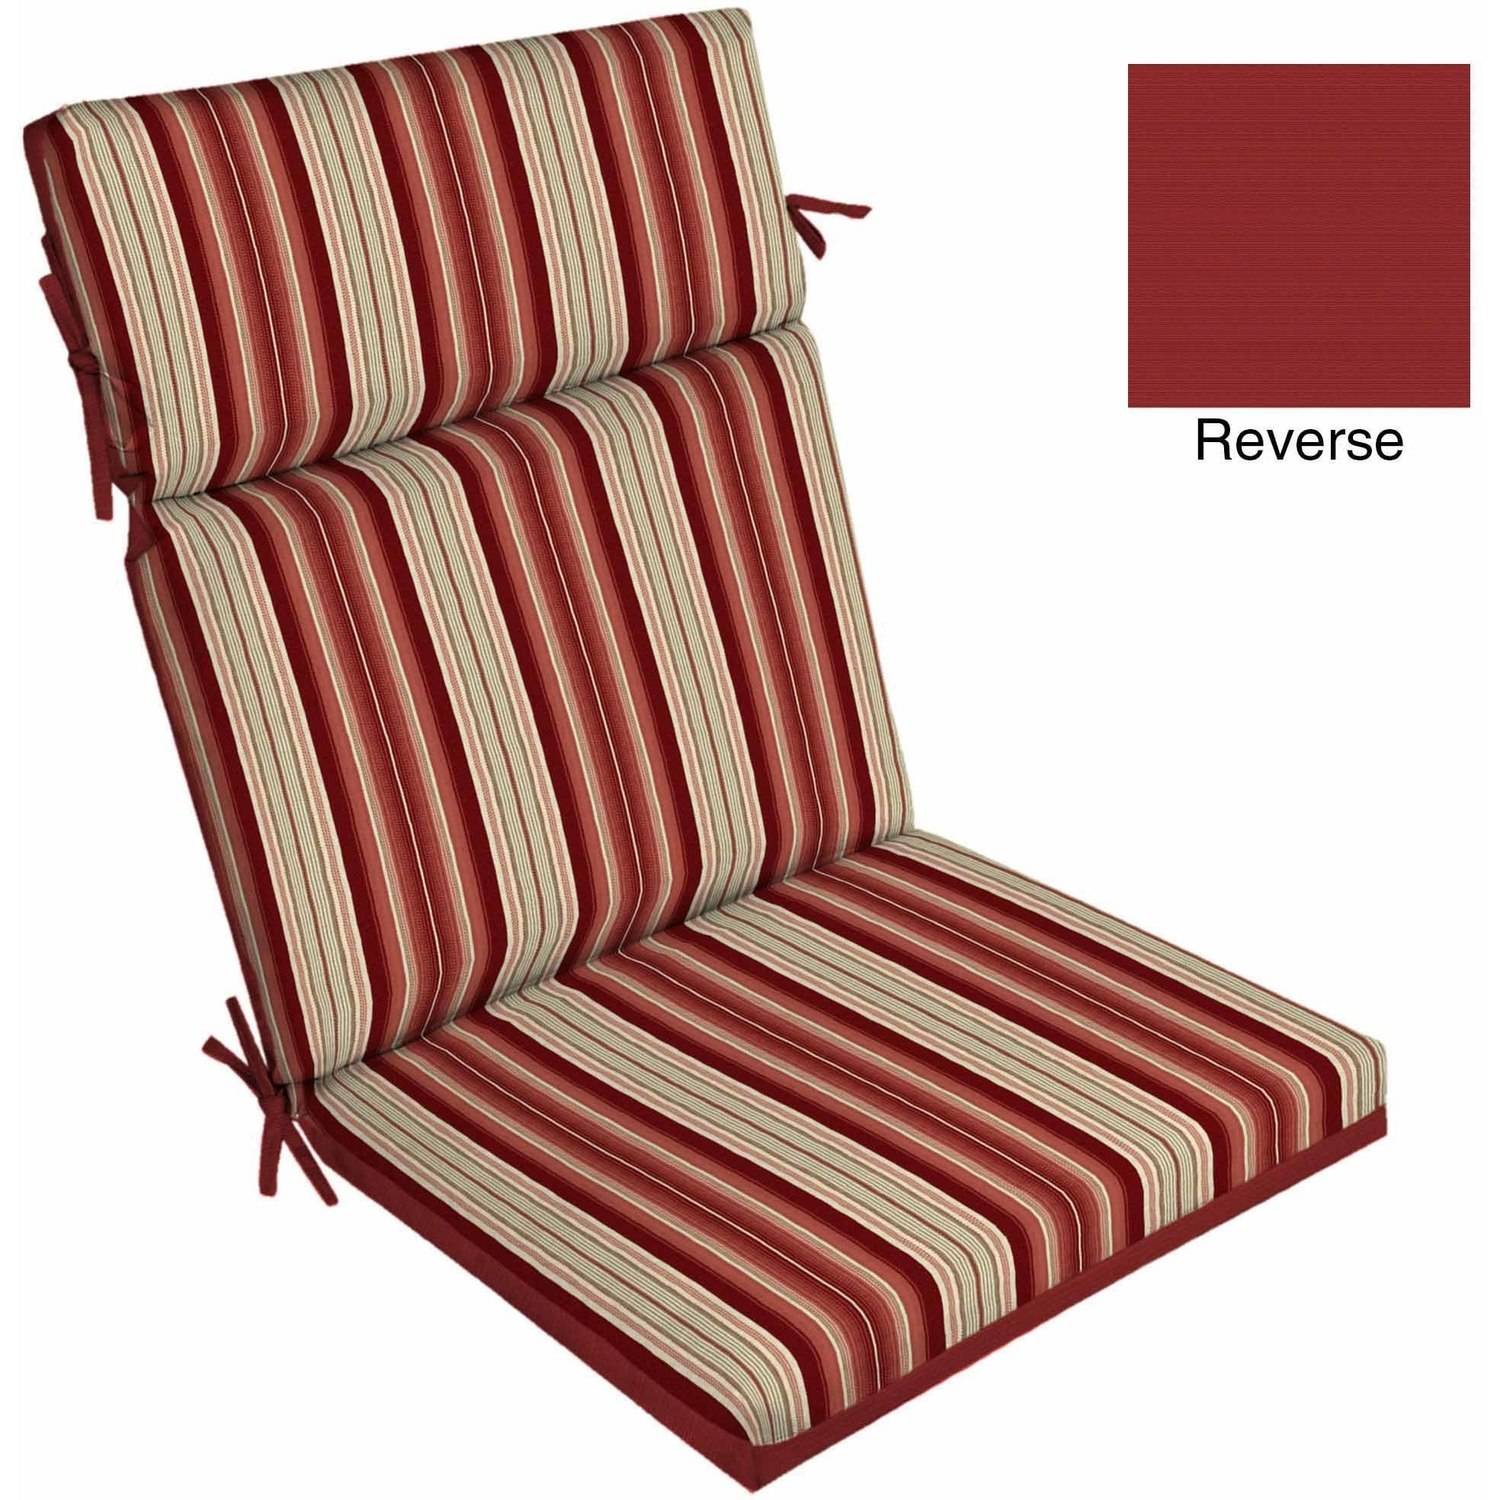 Outdoor Chair Cushions to Change the look
of your Patio